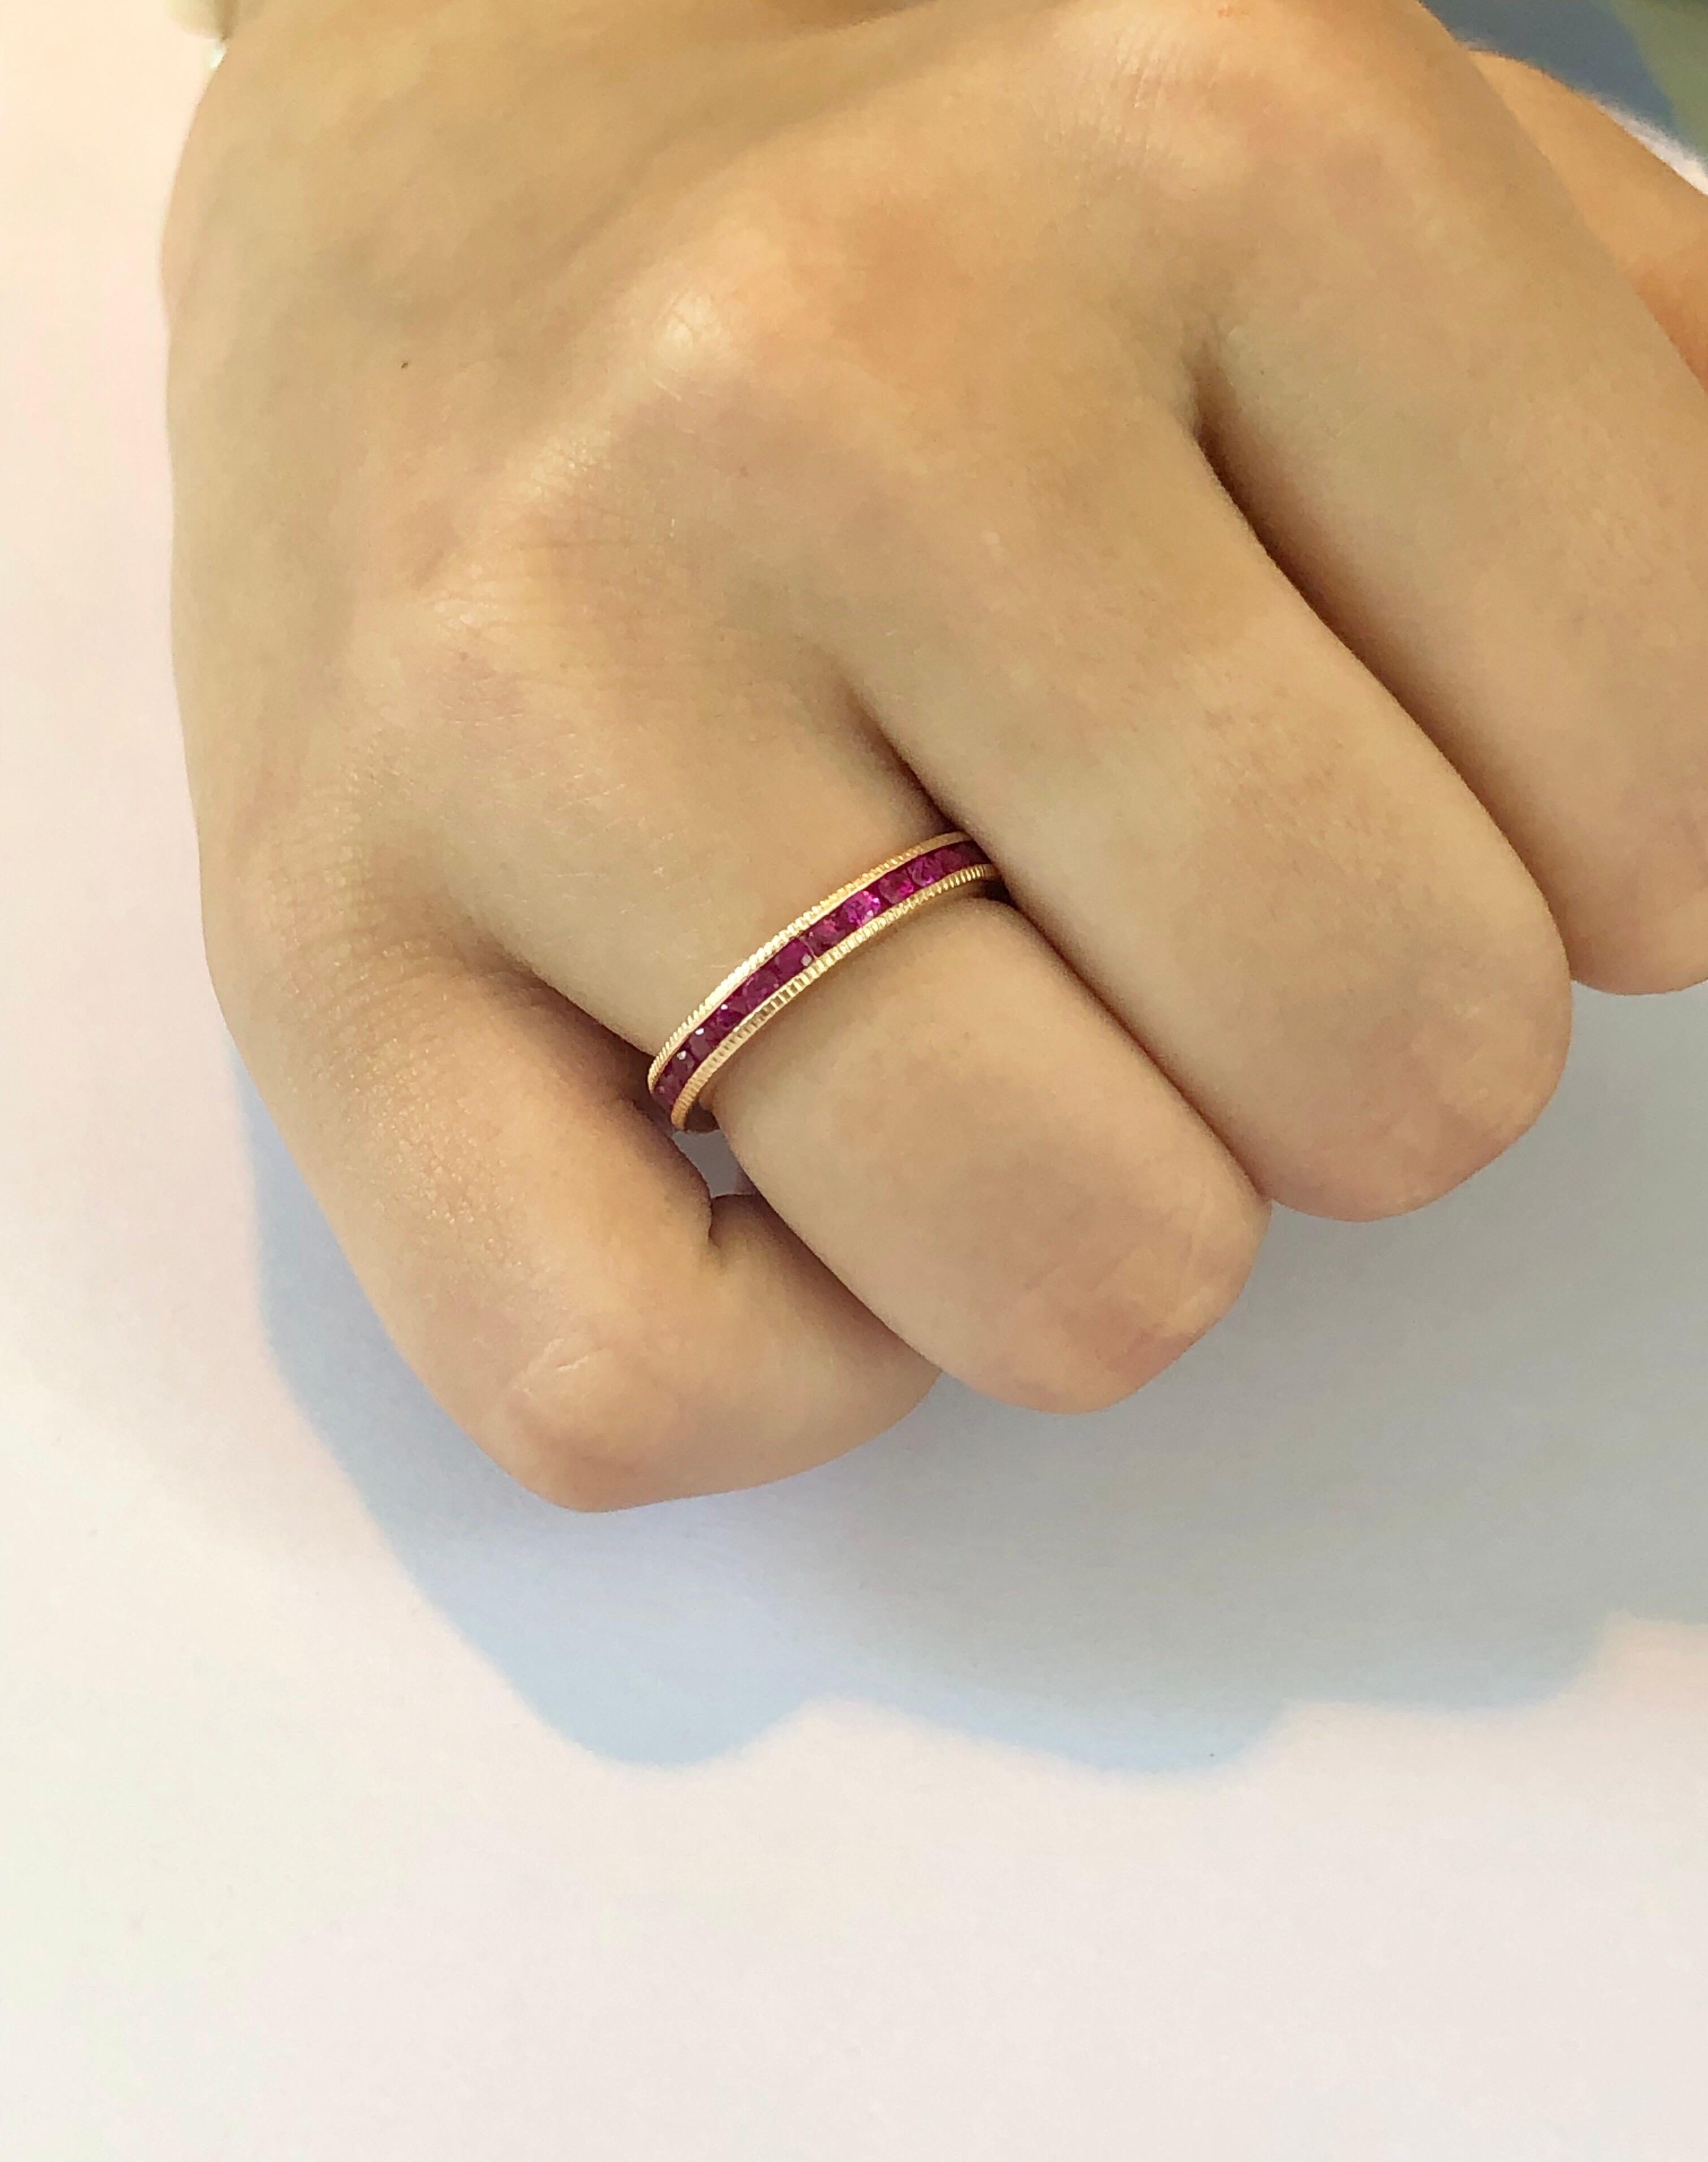 Eighteen karat rose gold eternity wedding or stacking band with migraine edge
Burma ruby weighing 1.90 carat 
Width of band 3.25 millimeter
New ring . 
Ring size 6 In Stock
Ring cannot be resized 
Handmade in USA
Our team of graduate gemologists